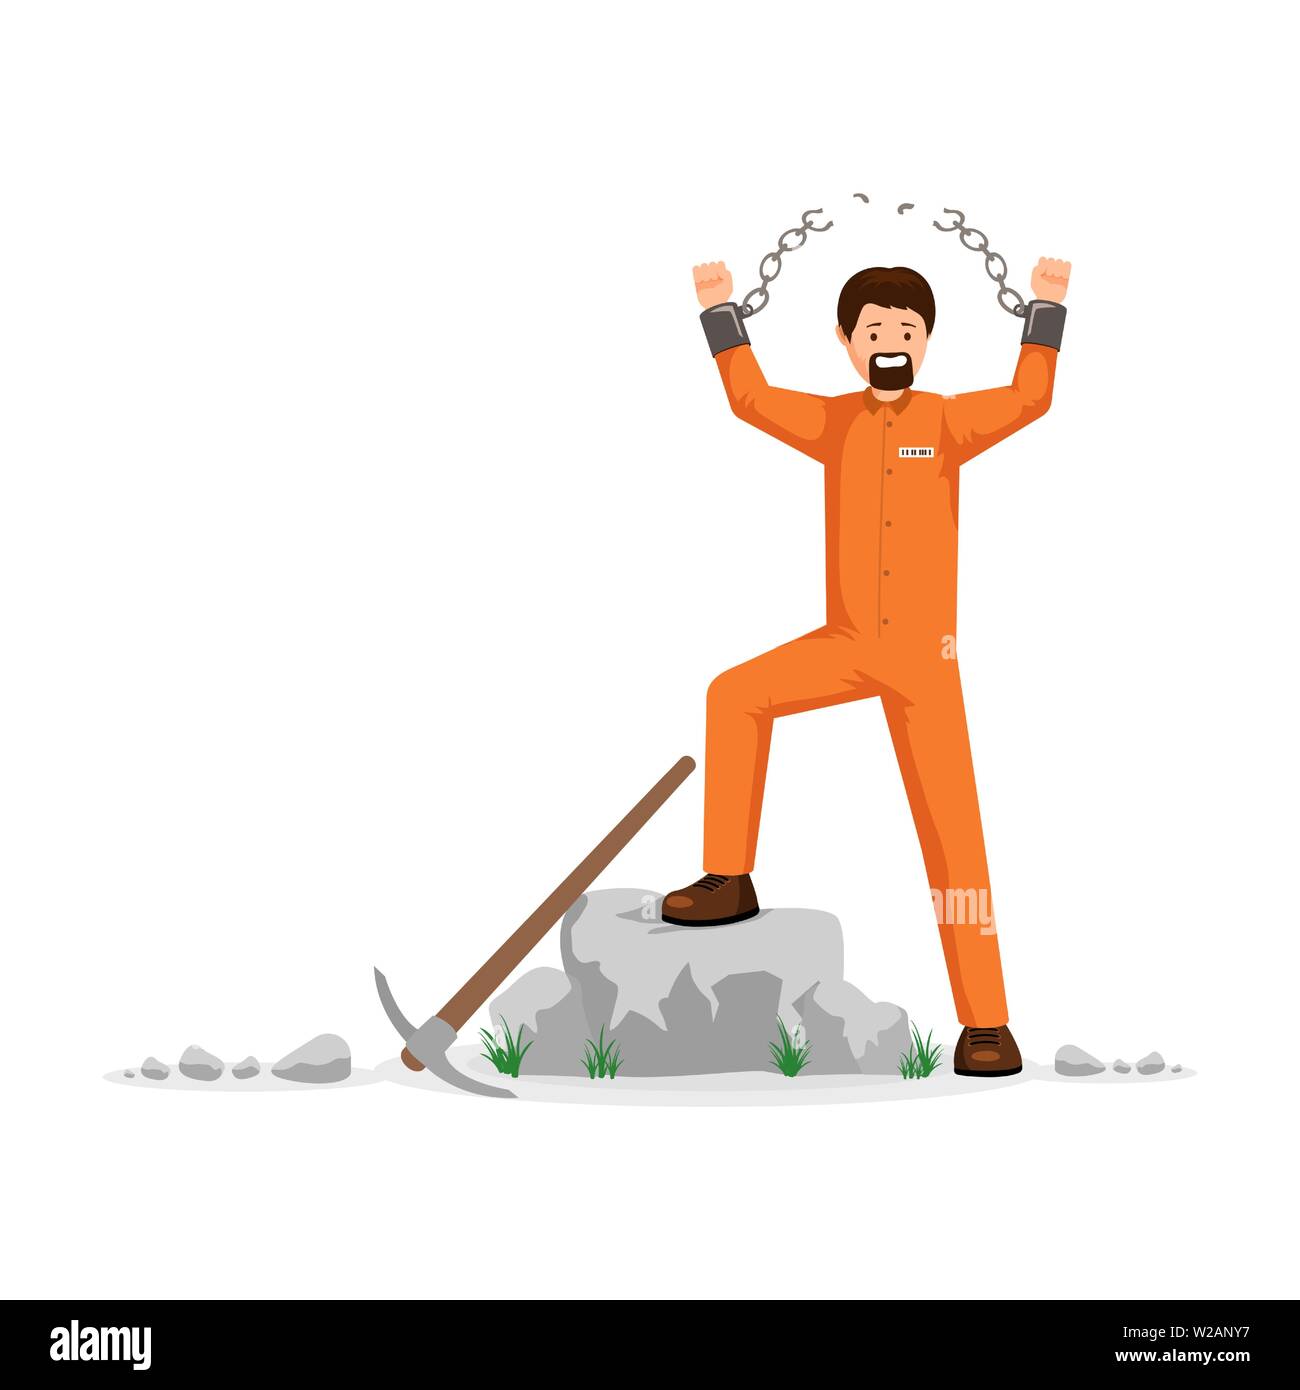 Freed prisoner with broken chains vector illustration. Man in orange prison uniform, hard labourer, rioting, conquering freedom. Male captive on correctional labour tearing shackles chain apart Stock Vector